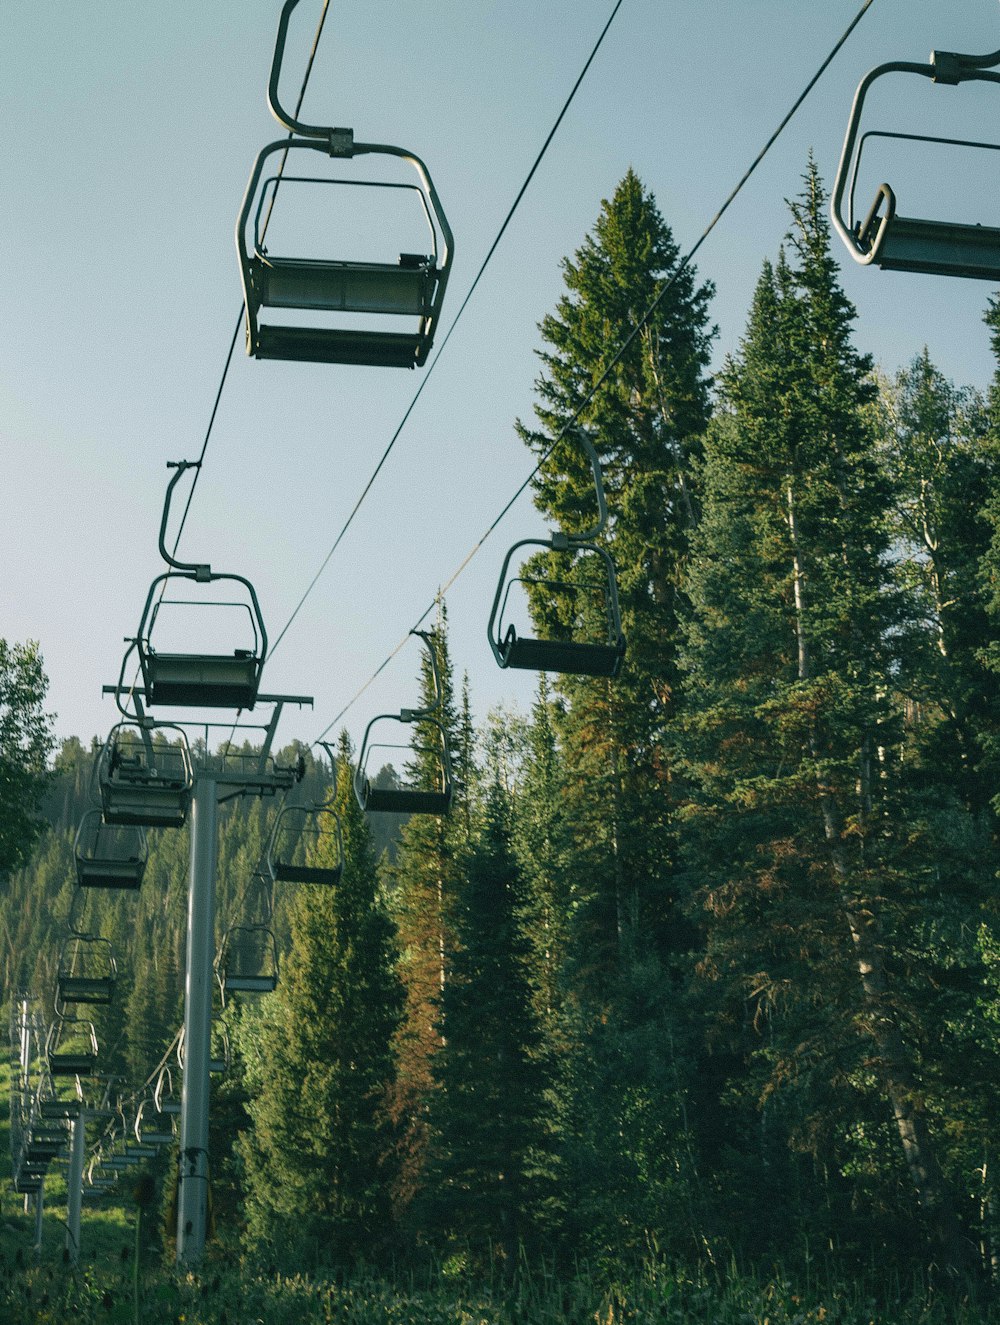 a group of people riding a ski lift over a forest